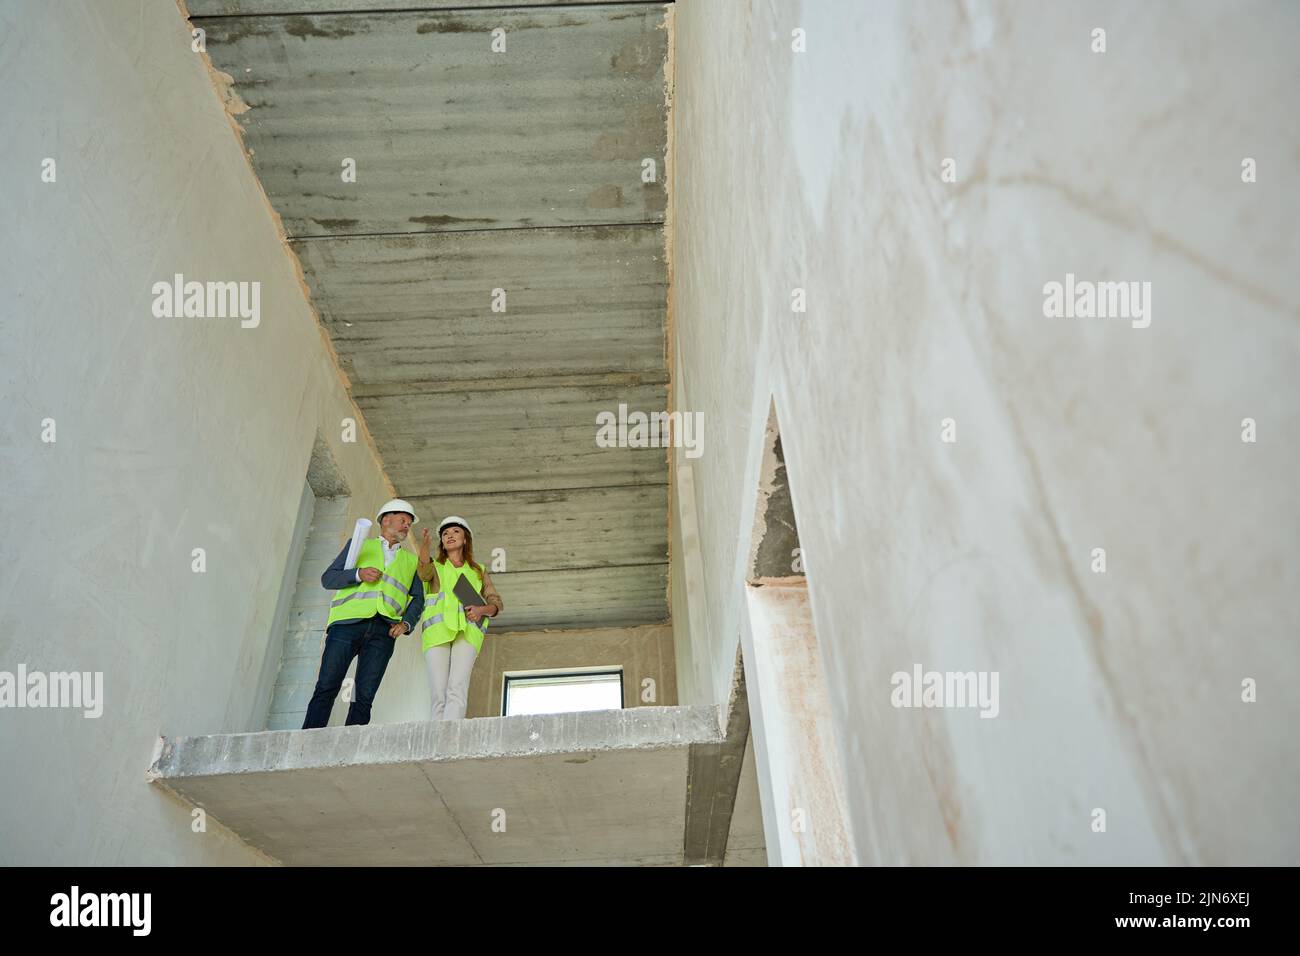 Foreman and manager inspect house under construction on second floor Stock Photo